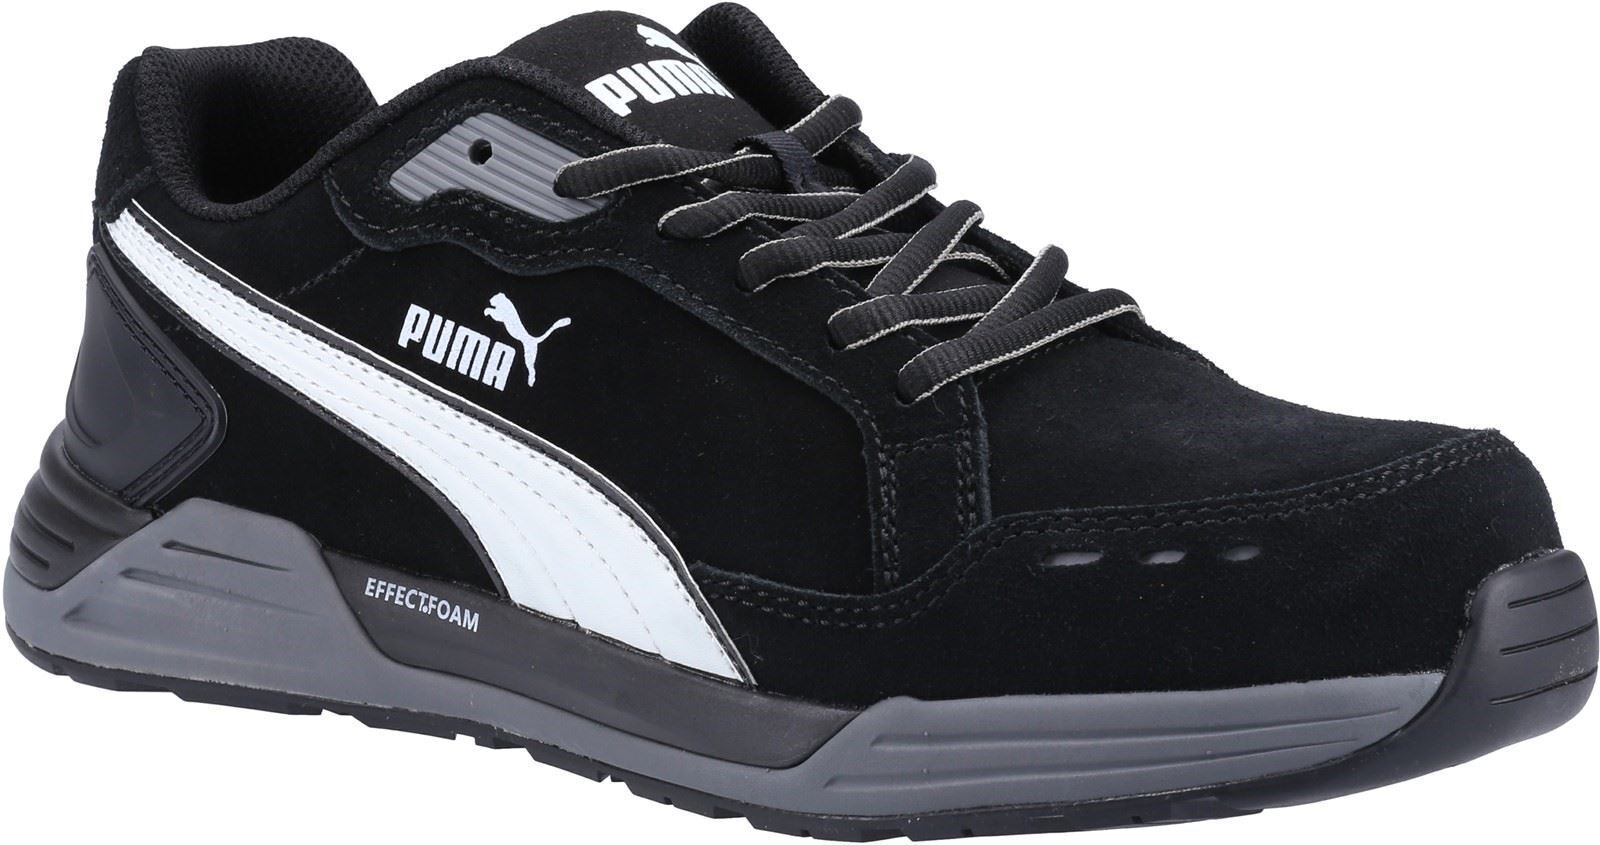 Puma Safety Trainers Safety Airtwist Black | Safety Low SRC HRO Trainer S3 eBay ESD